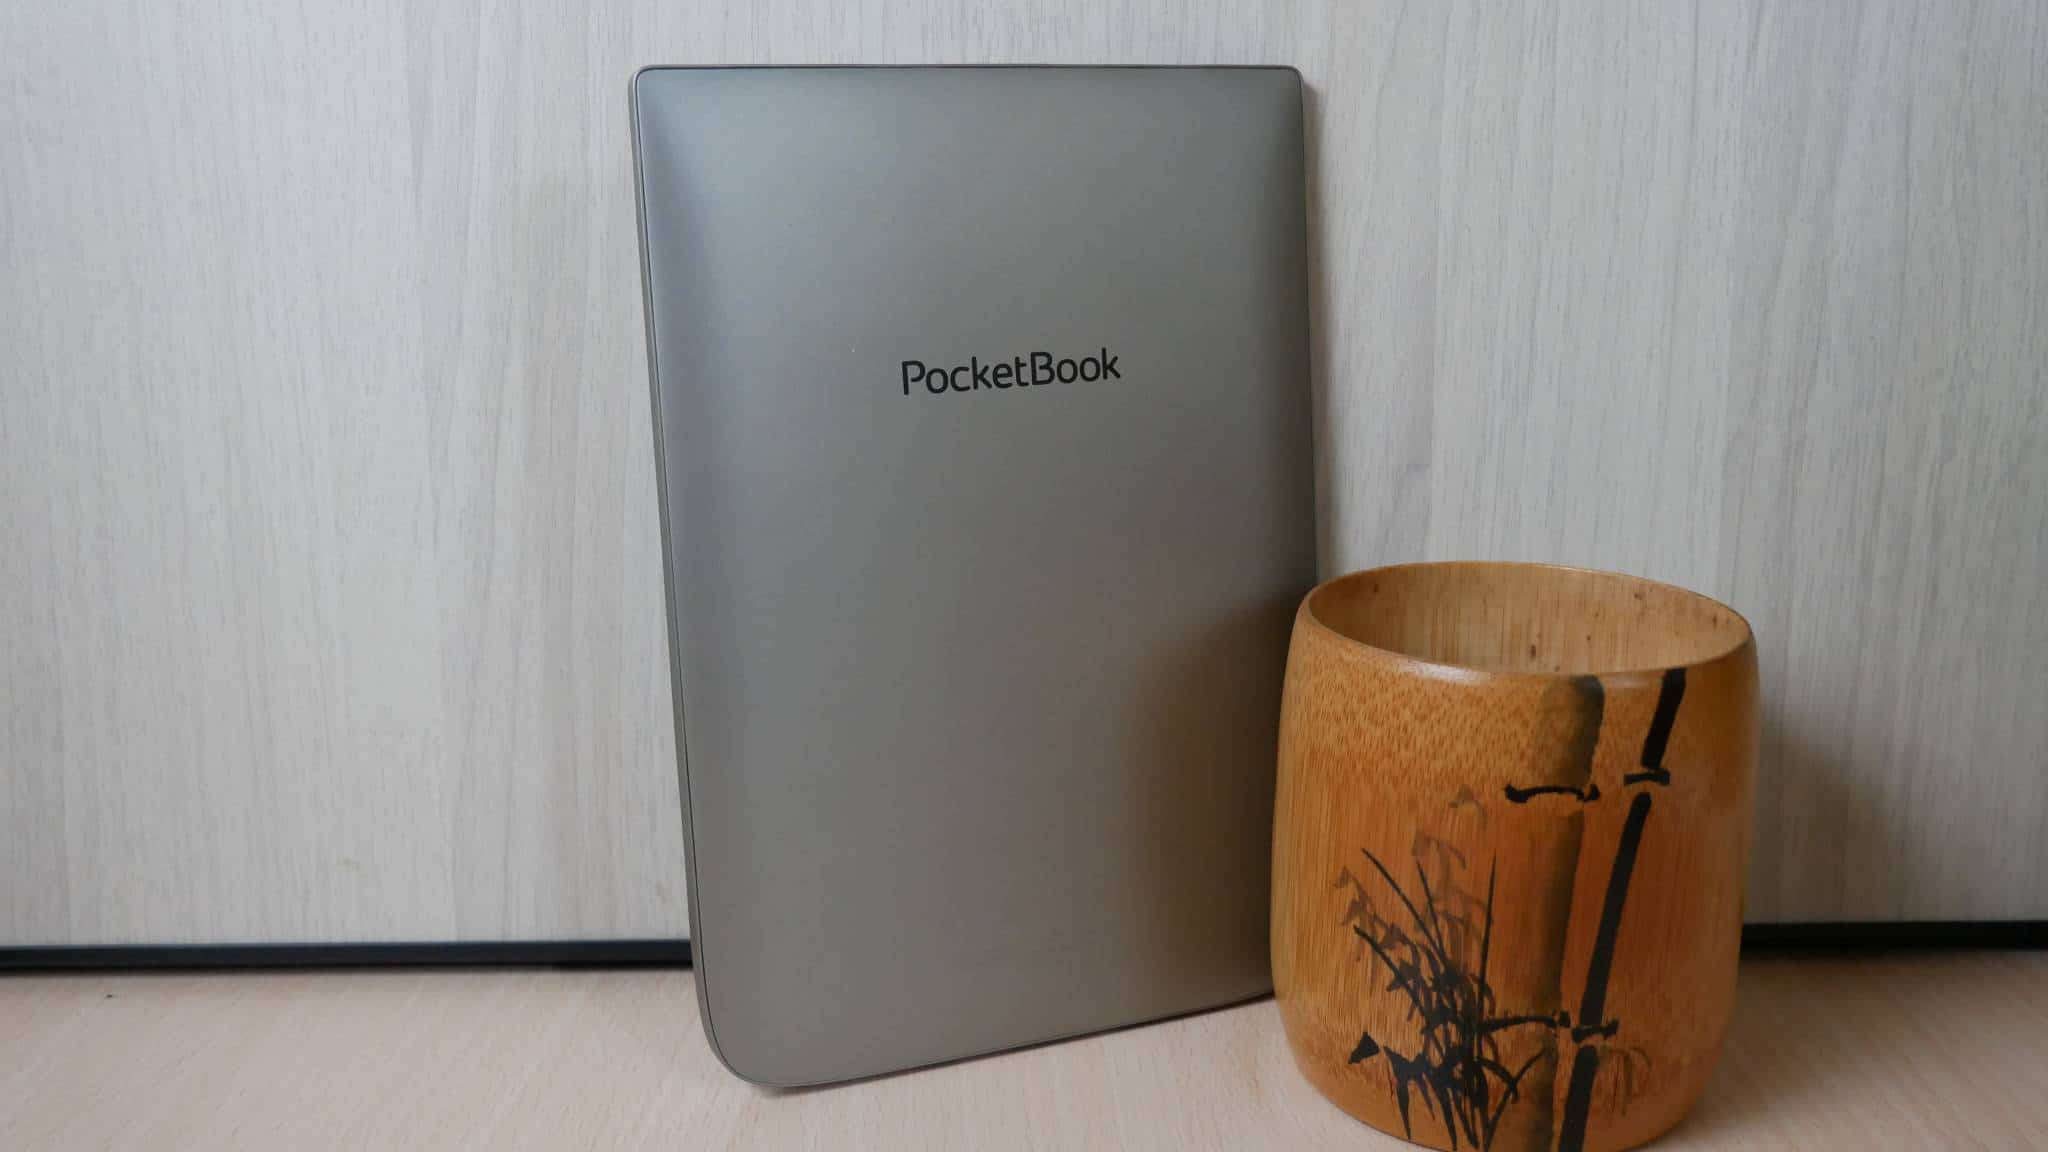 Hands on Review of the Pocketbook InkPad Color e-Reader - Good e-Reader